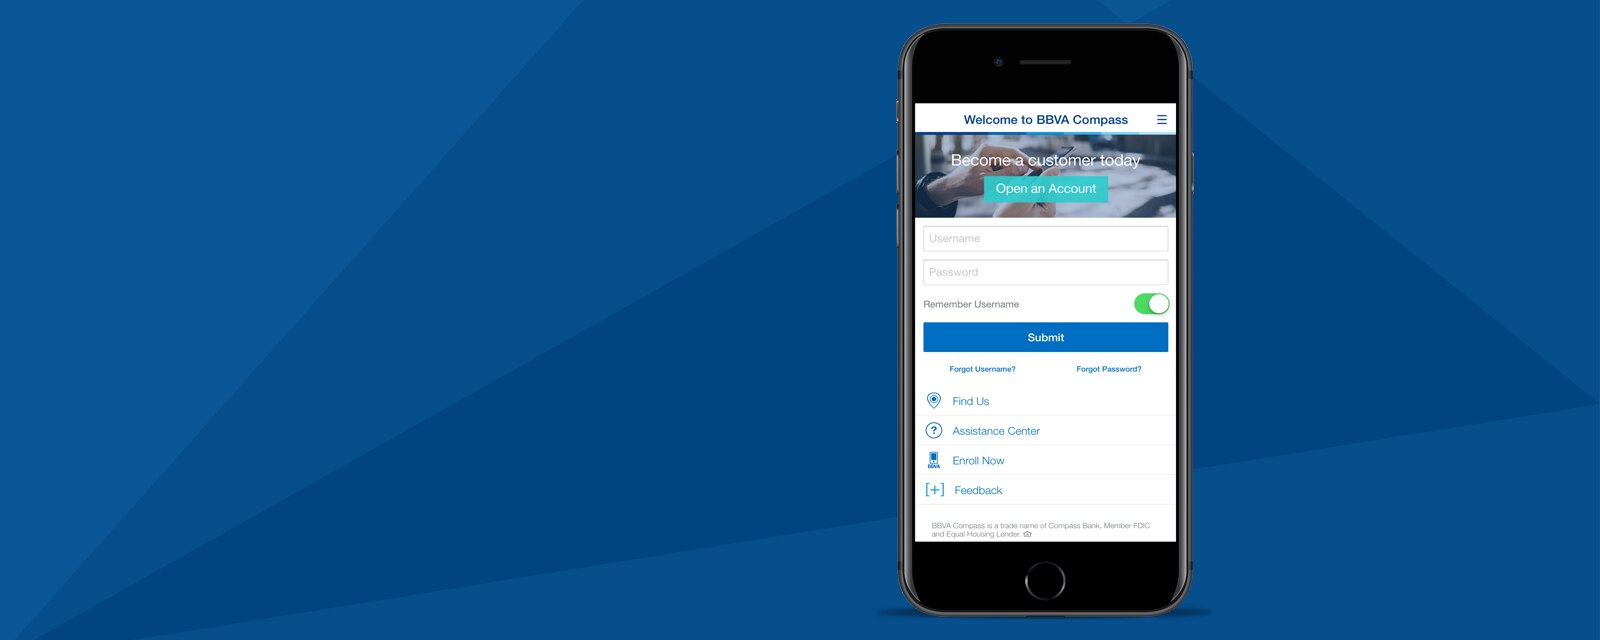 BBVA Compass Mobile Banking 5.0 makes becoming a customer easier